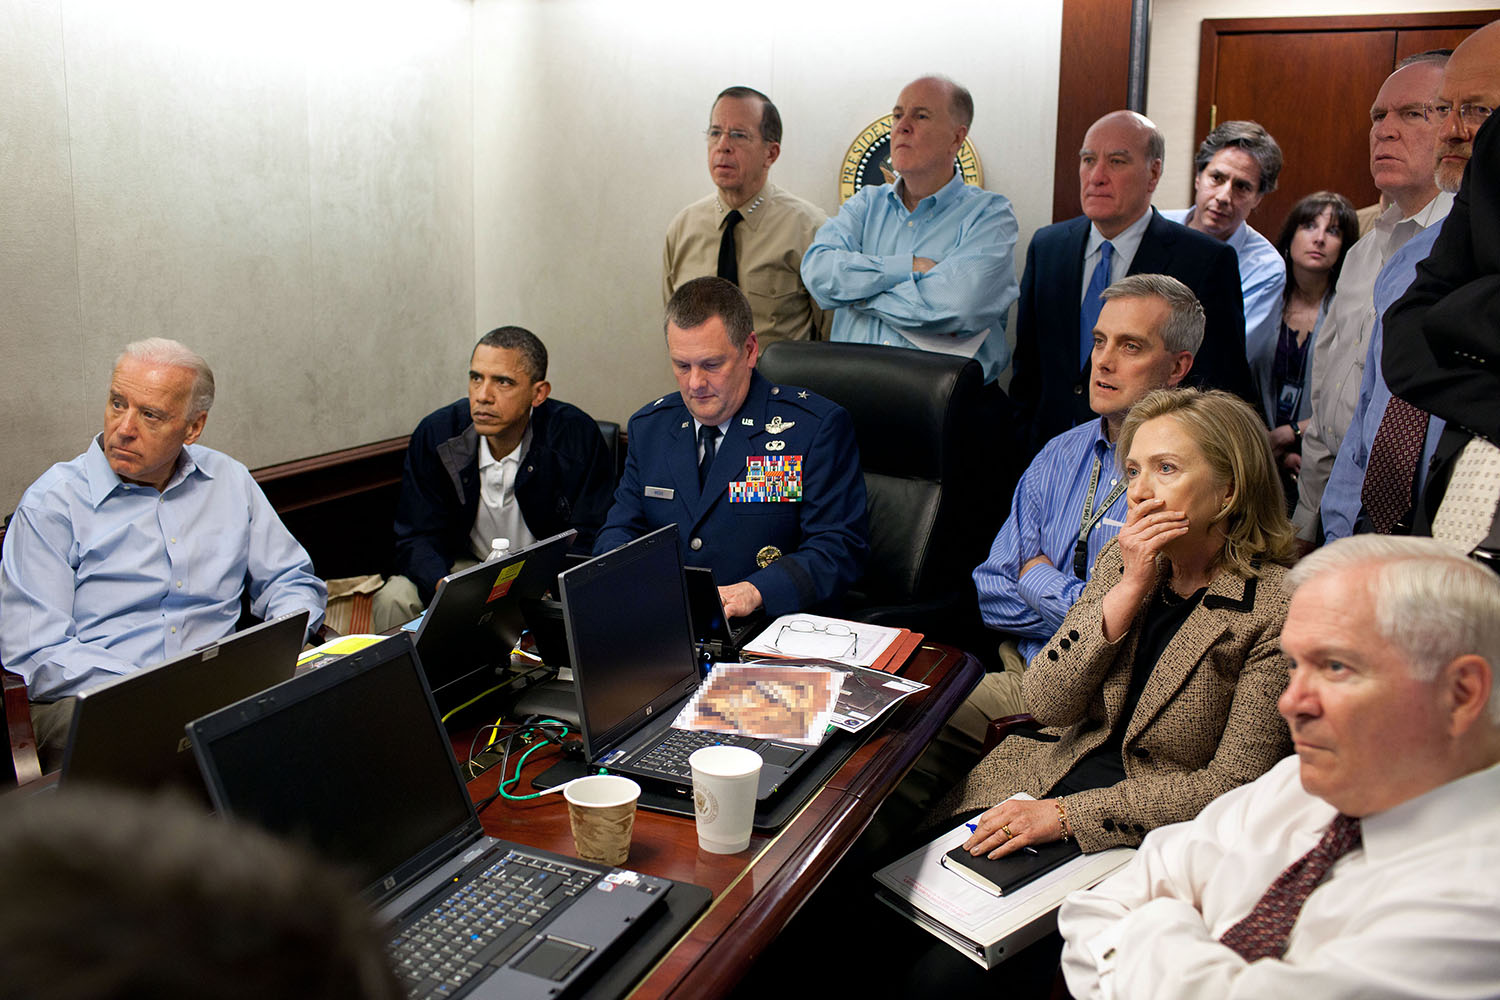 May 1, 2011
"Much has been made of this photograph that shows the President and Vice President and the national security team monitoring in real time the mission against Osama bin Laden. Some more background on the photograph: The White House Situation Room is actually comprised of several different conference rooms. The majority of the time, the President convenes meetings in the large conference room with assigned seats. But to monitor this mission, the group moved into the much smaller conference room. The President chose to sit next to Brigadier General Marshall B. “Brad” Webb, Assistant Commanding General of Joint Special Operations Command, who was point man for the communications taking place. WIth so few chairs, others just stood at the back of the room. I was jammed into a corner of the room with no room to move. During the mission itself, I made approximately 100 photographs, almost all from this cramped spot in the corner. There were several other meetings throughout the day, and we've put together a composite of several photographs (see next photo in this set) to give people a better sense of what the day was like.  Seated in this picture from left to right: Vice President Biden, the President, Brig. Gen. Webb, Deputy National Security Advisor Denis McDonough, Secretary of State Hillary Rodham Clinton, and then Secretary of Defense Robert Gates. Standing, from left, are: Admiral Mike Mullen, then Chairman of the Joint Chiefs of Staff; National Security Advisor Tom Donilon; Chief of Staff Bill Daley; Tony Blinken, National Security Advisor to the Vice President; Audrey Tomason Director for Counterterrorism; John Brennan, Assistant to the President for Homeland Security and Counterterrorism; and Director of National Intelligence James Clapper. Please note: a classified document seen in front of Sec. Clinton has been obscured." 
(Official White House Photo by Pete Souza)

This official White House photograph is being made available only for publication